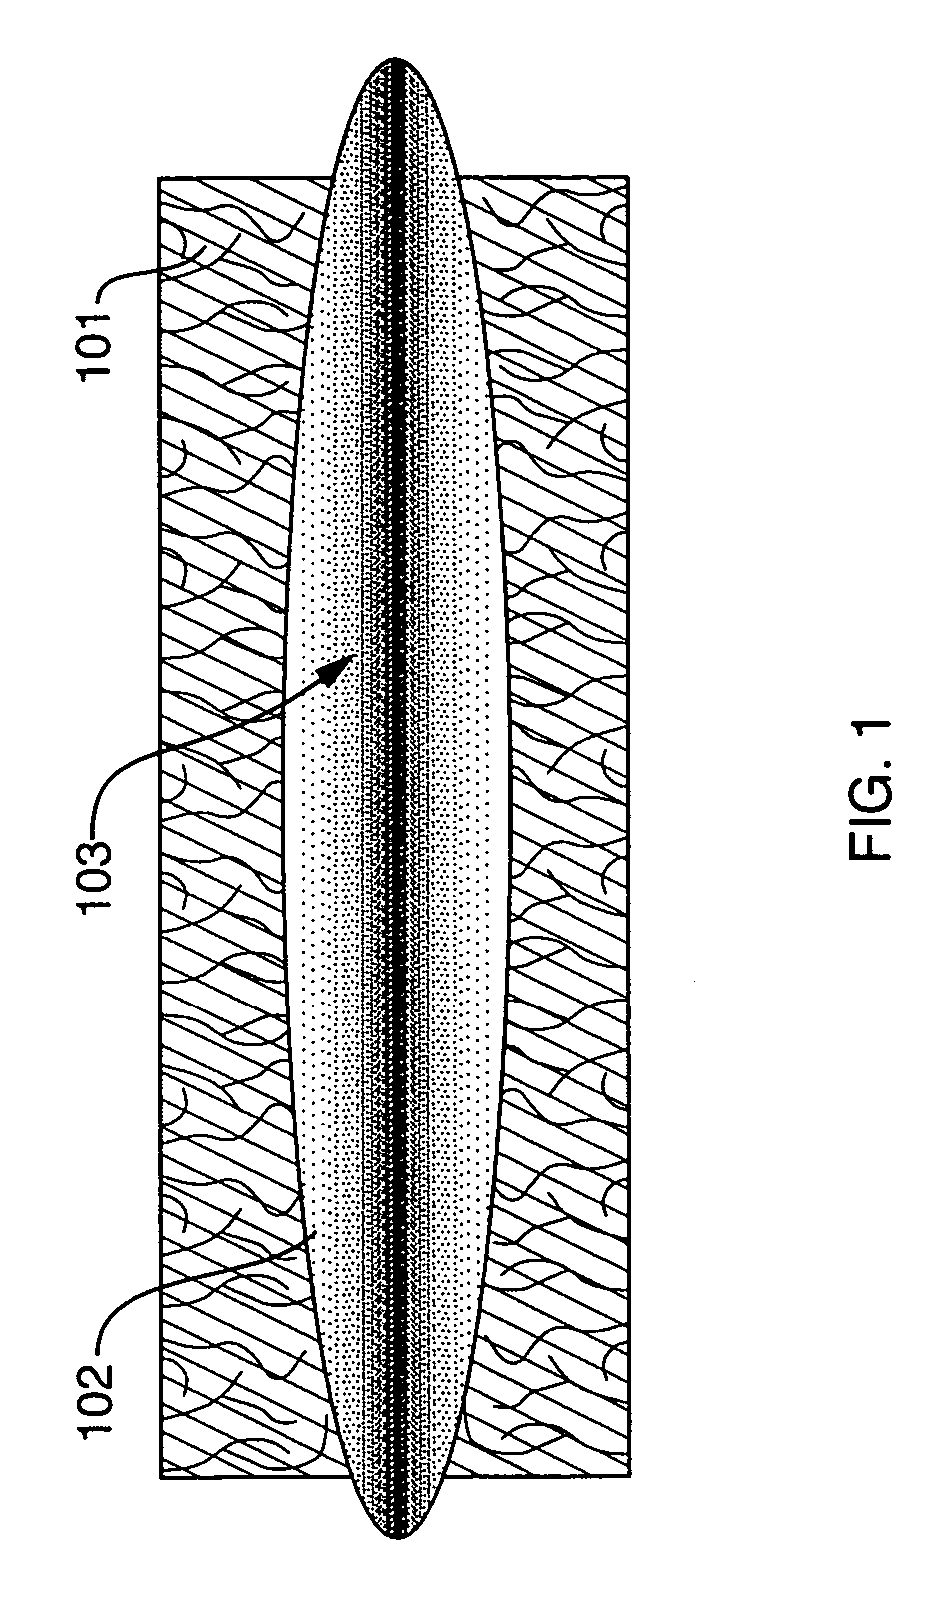 Controlled absorption biograft material for autologous tissue support